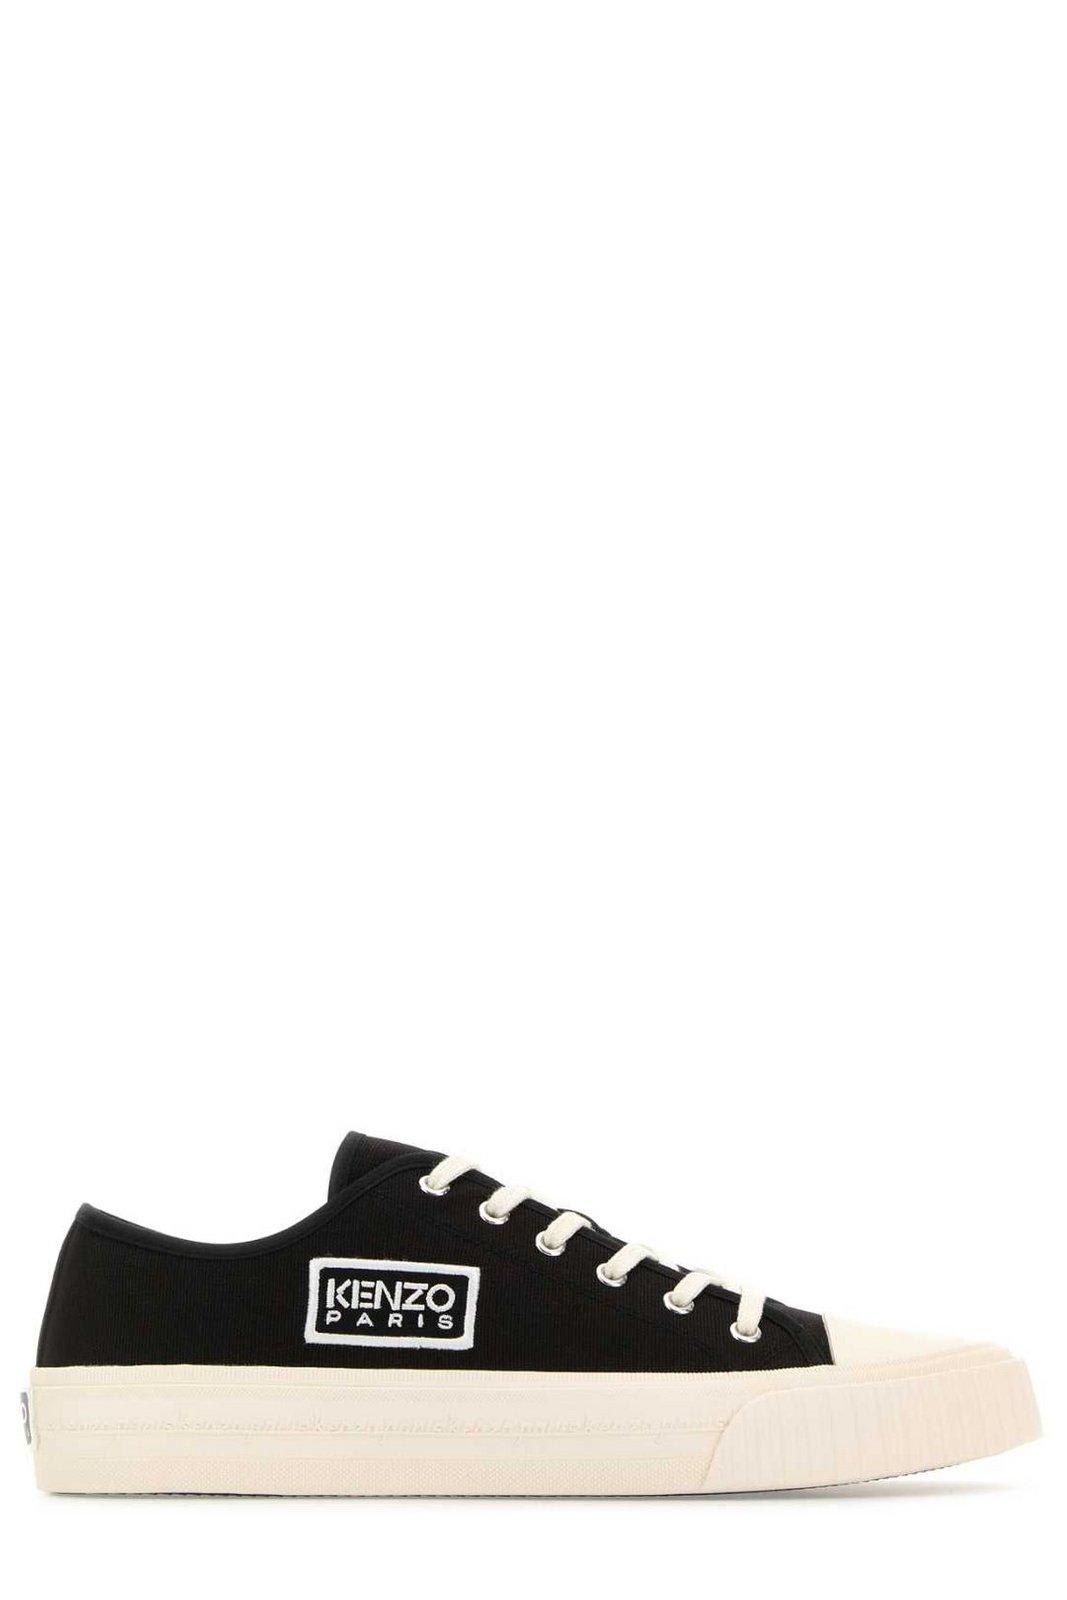 Kenzo Logo Embroidered Low-top Sneakers In Black